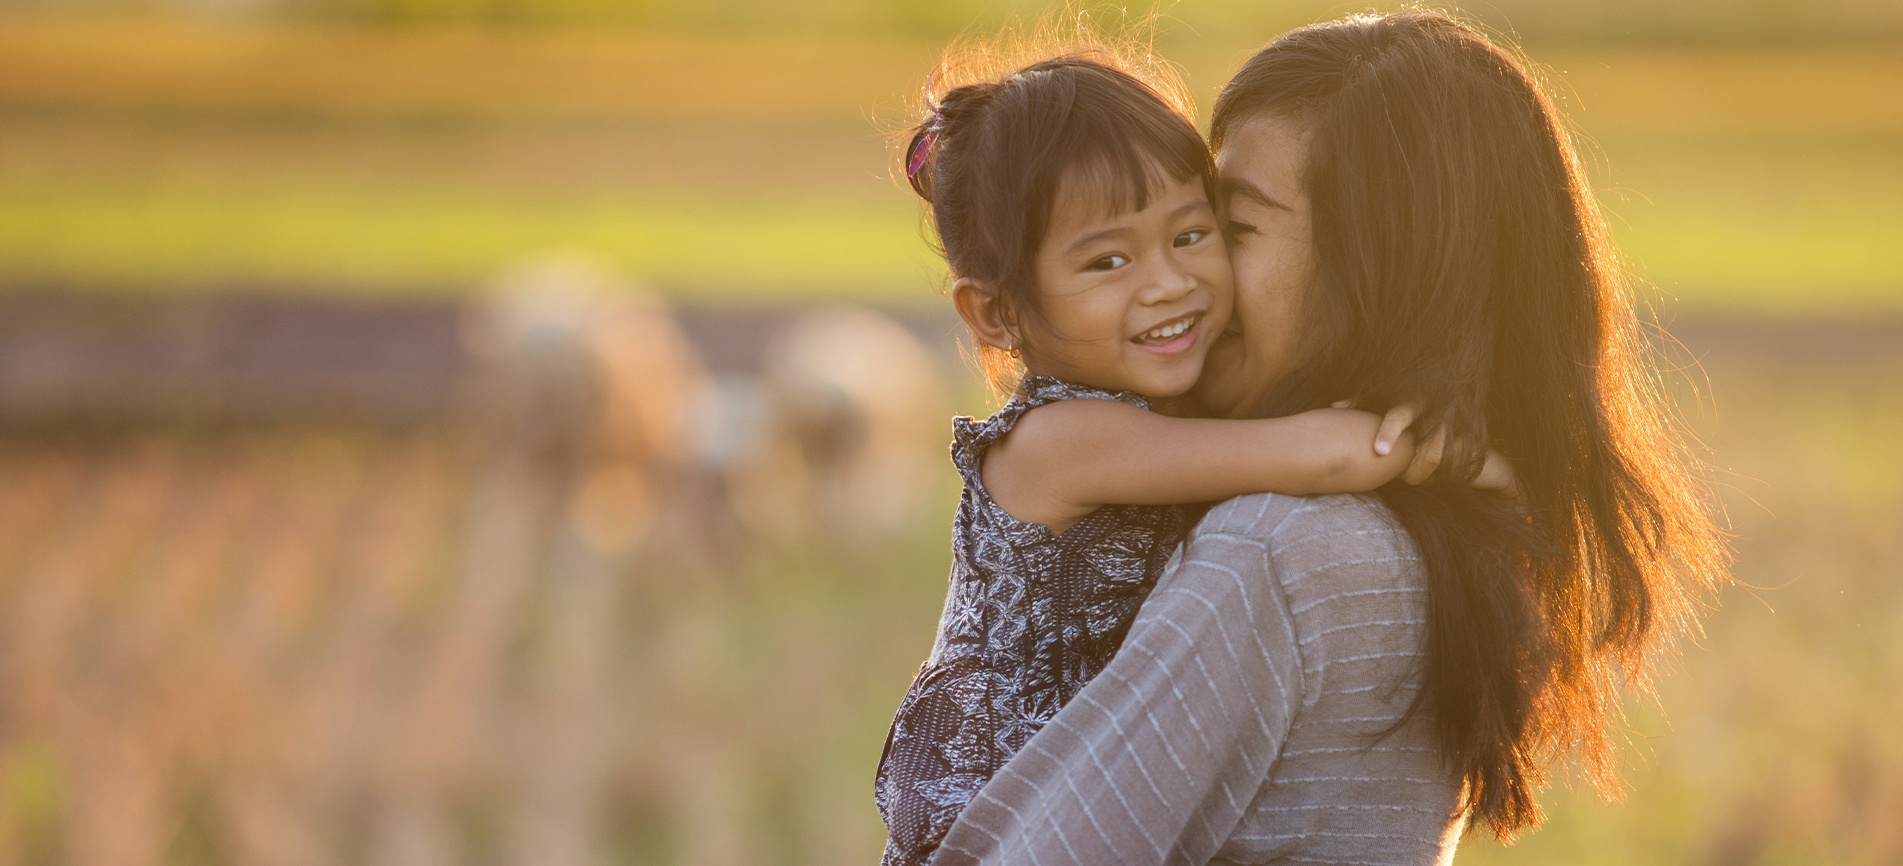 An Asian mother holds her smiling young daughter as they look out over farmland in late afternoon sun